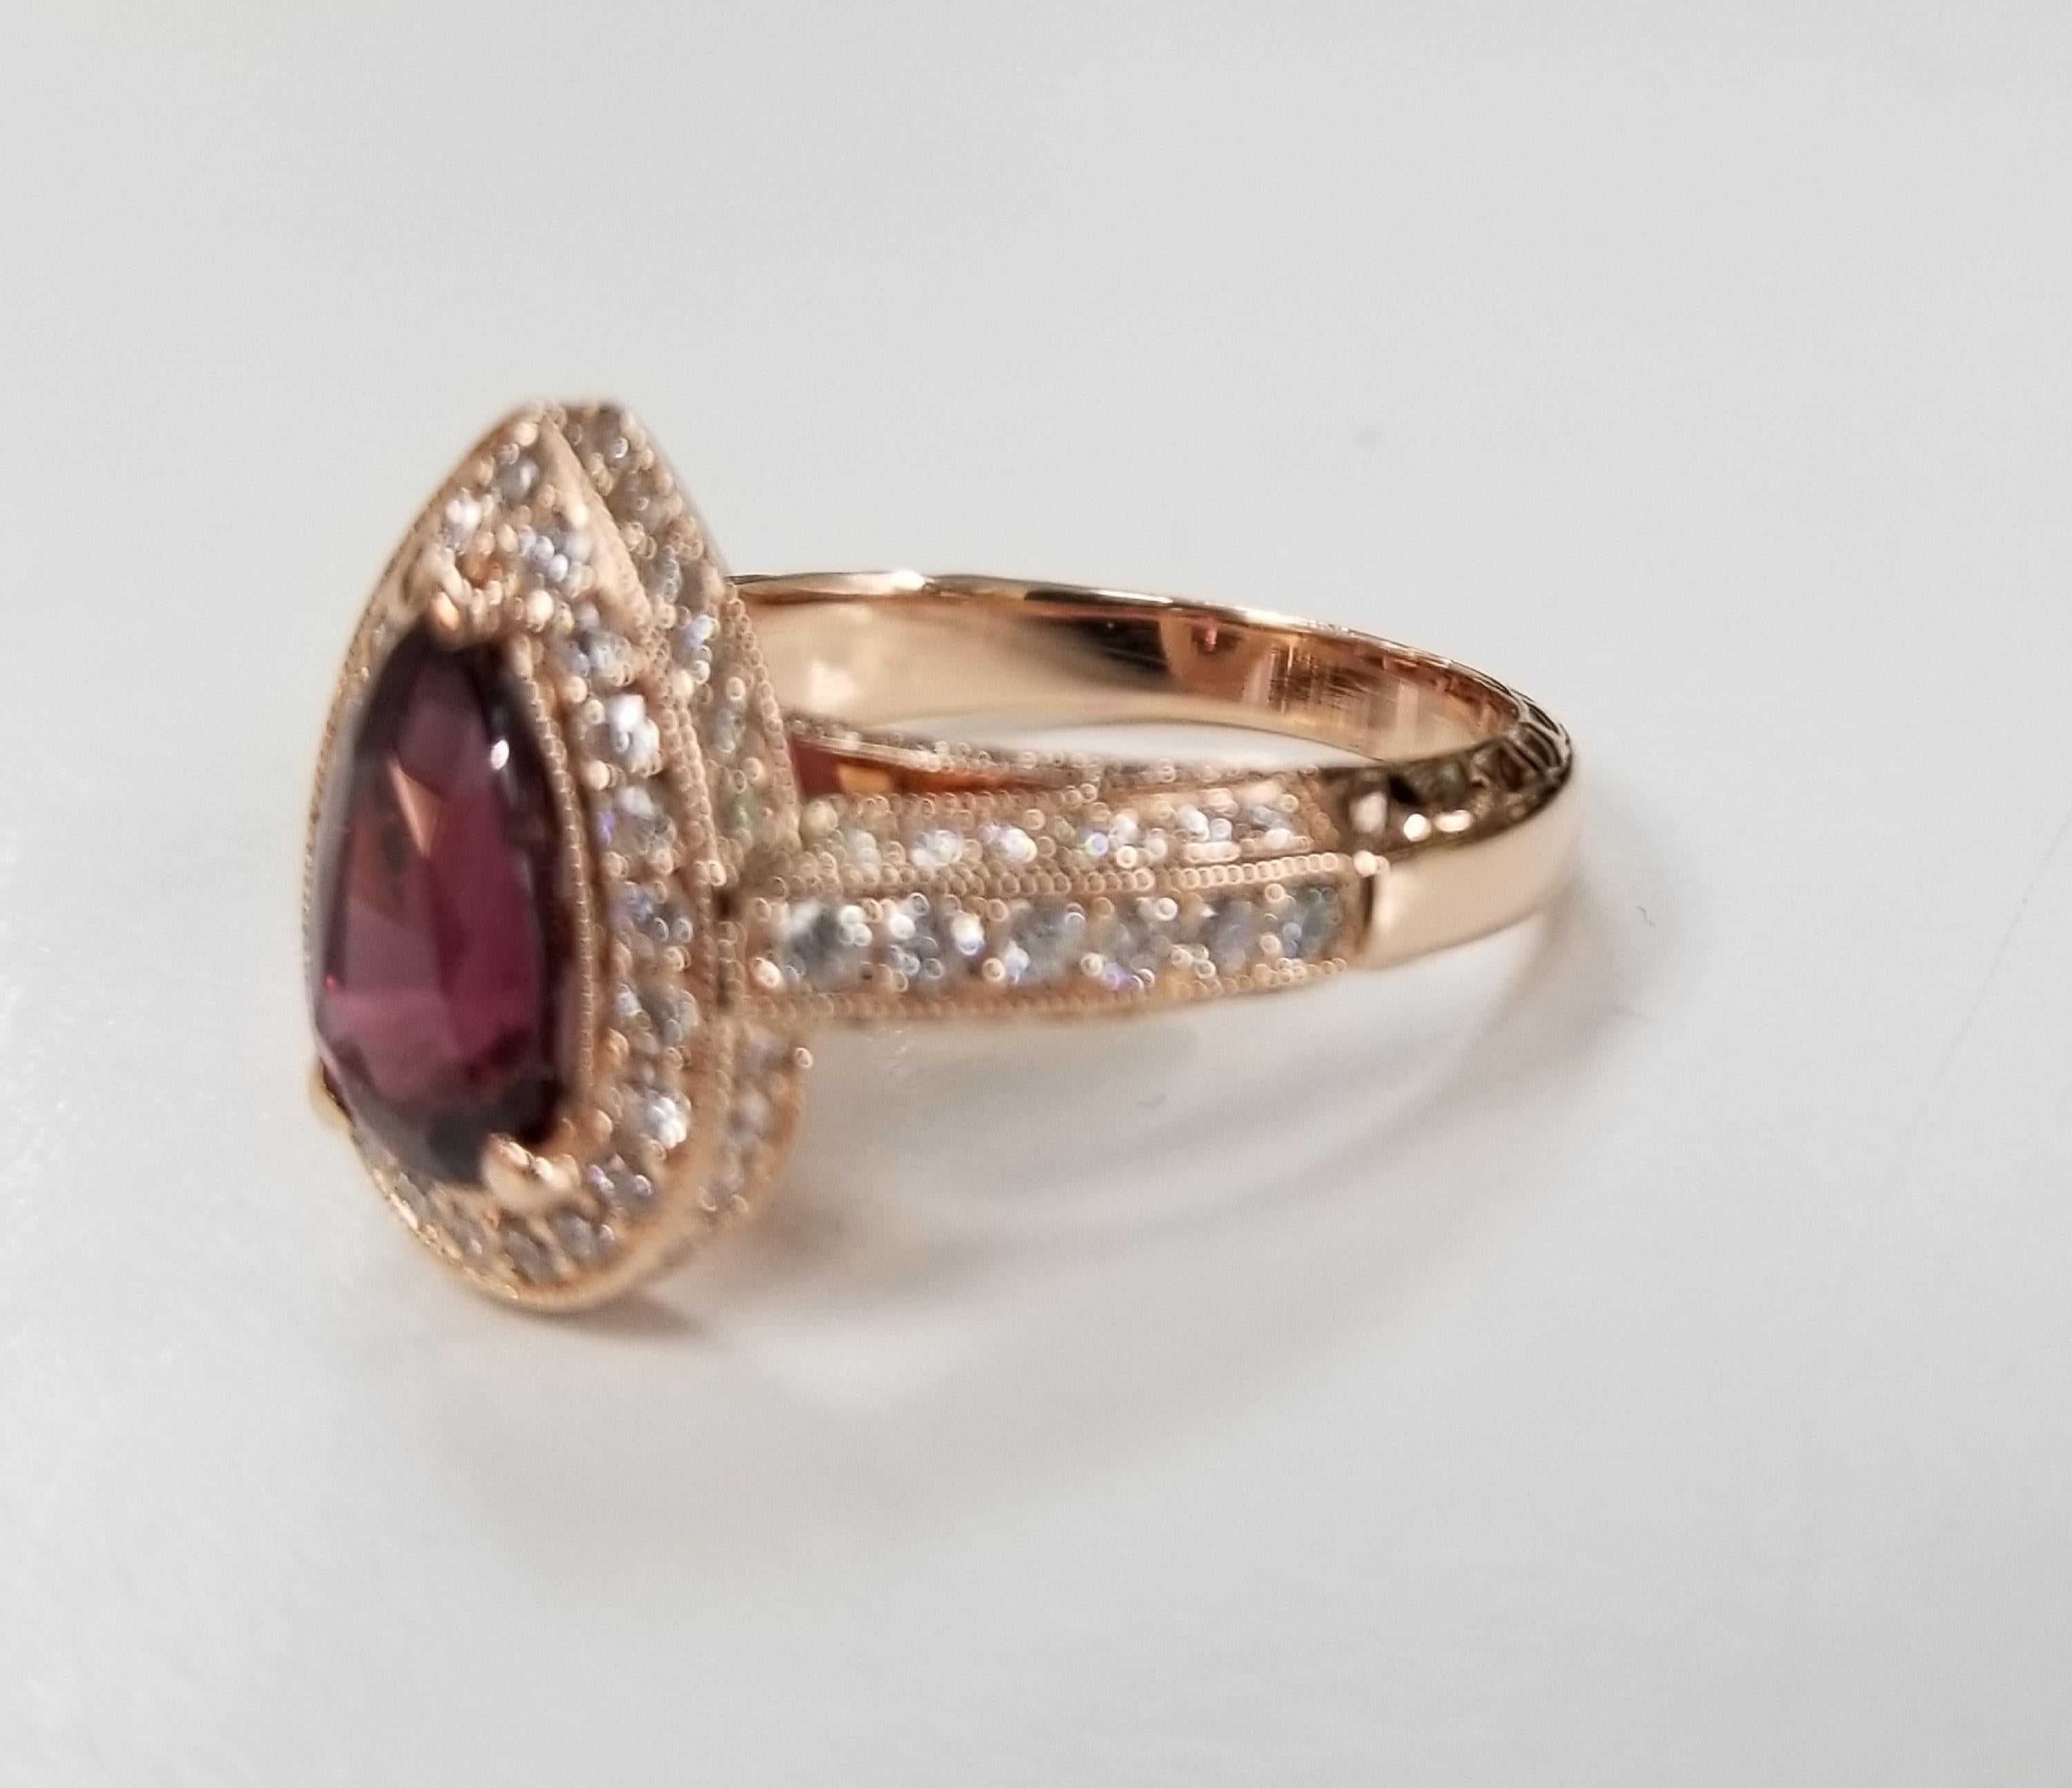 18k rose gold Rhodolite Garnet and diamond halo beaded ring, containing 1 pear shape Rhodolite Garnet of gem quality weighing 2.20cts.  Surrounded by 90 round full cut diamonds; color 